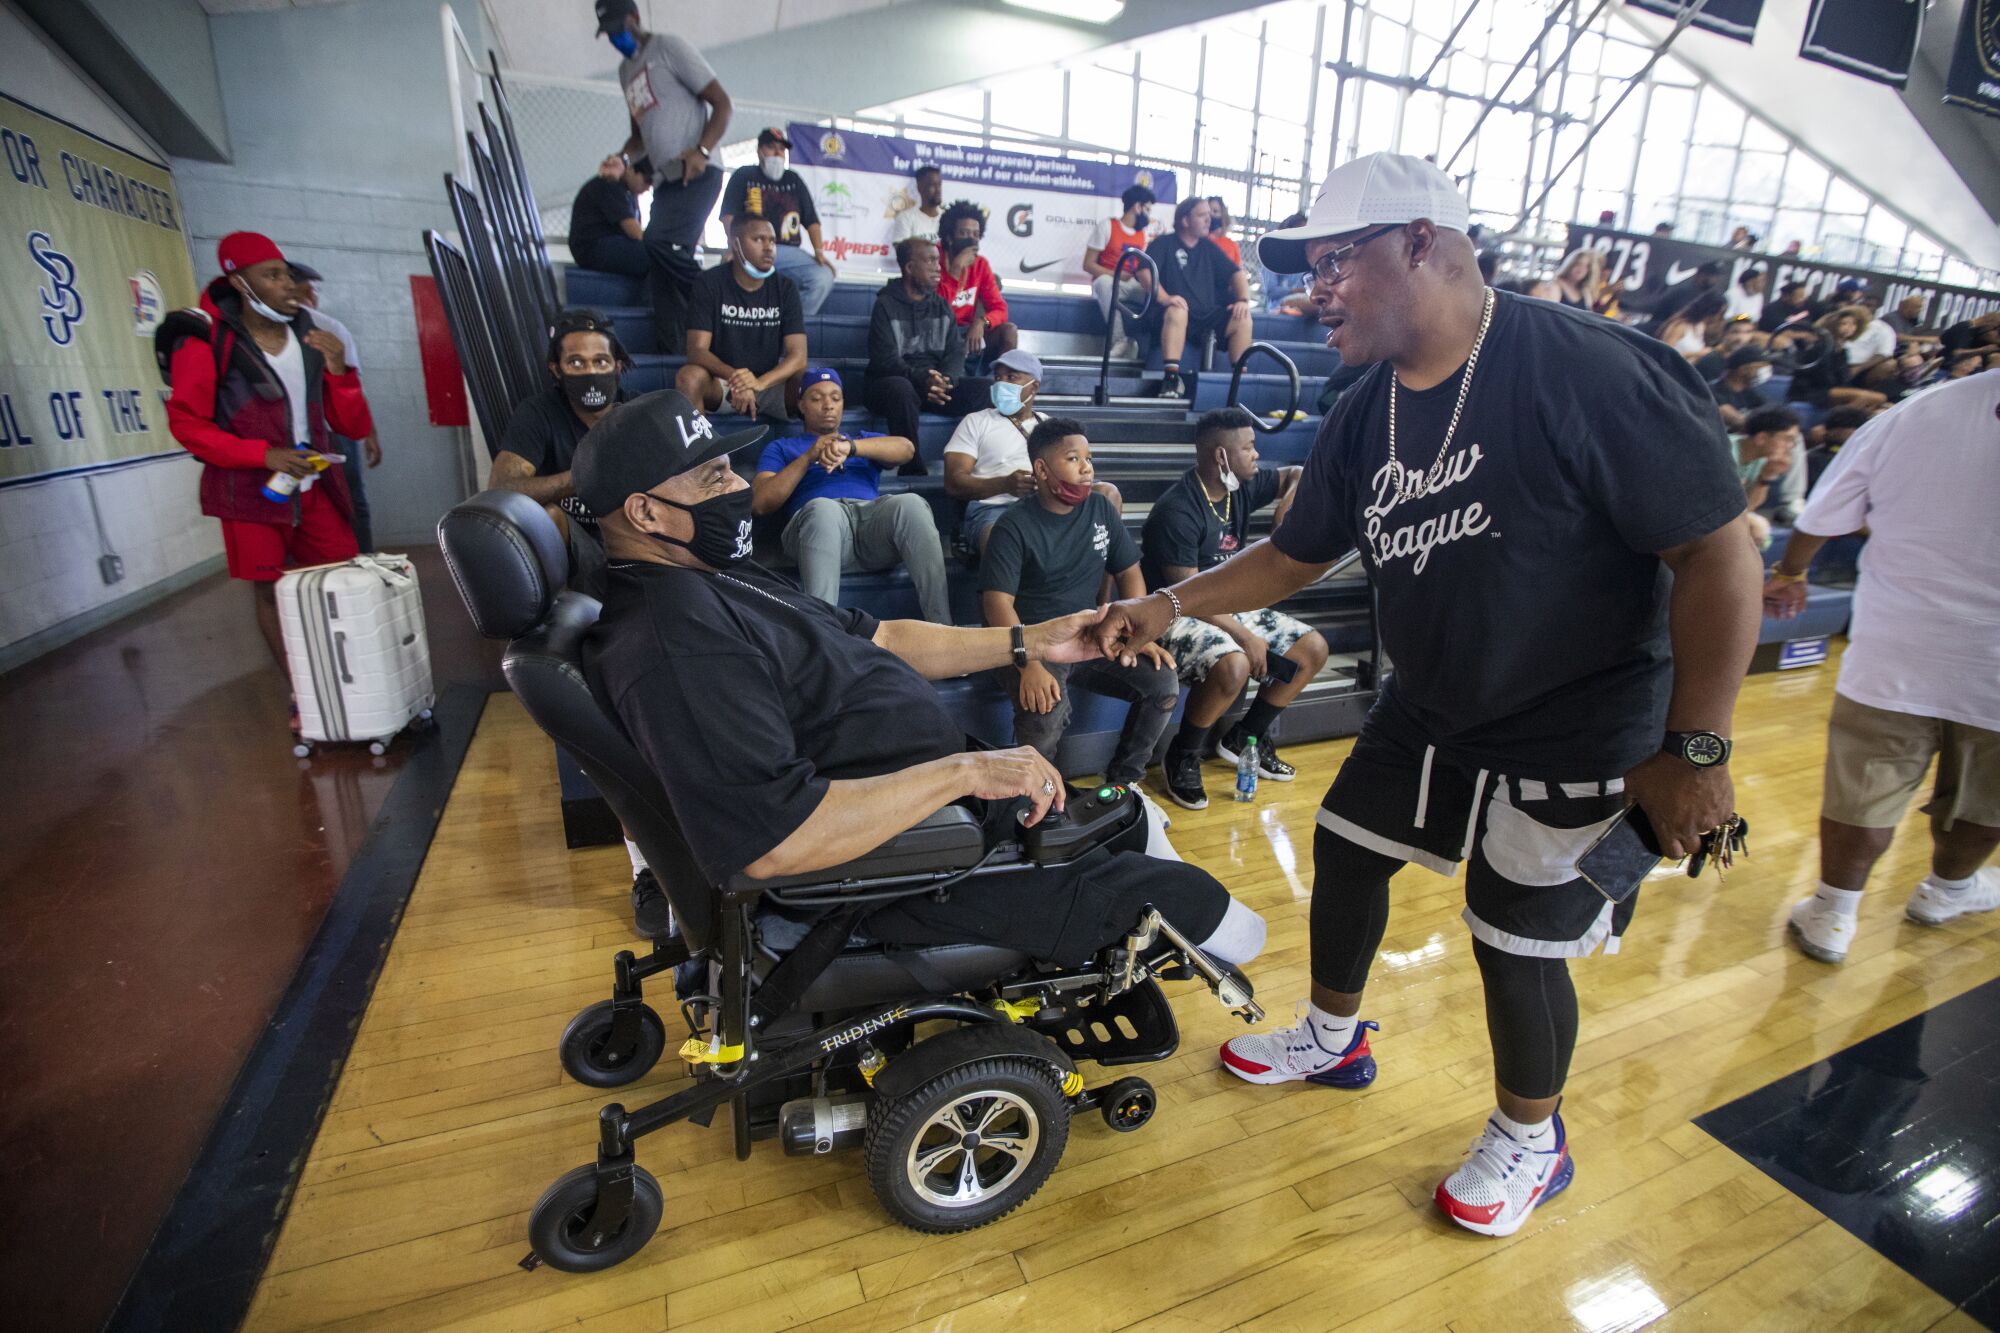 Friend greets Bill Crawford as he arrives in his wheelchair at a high school gymnasium on June 19.